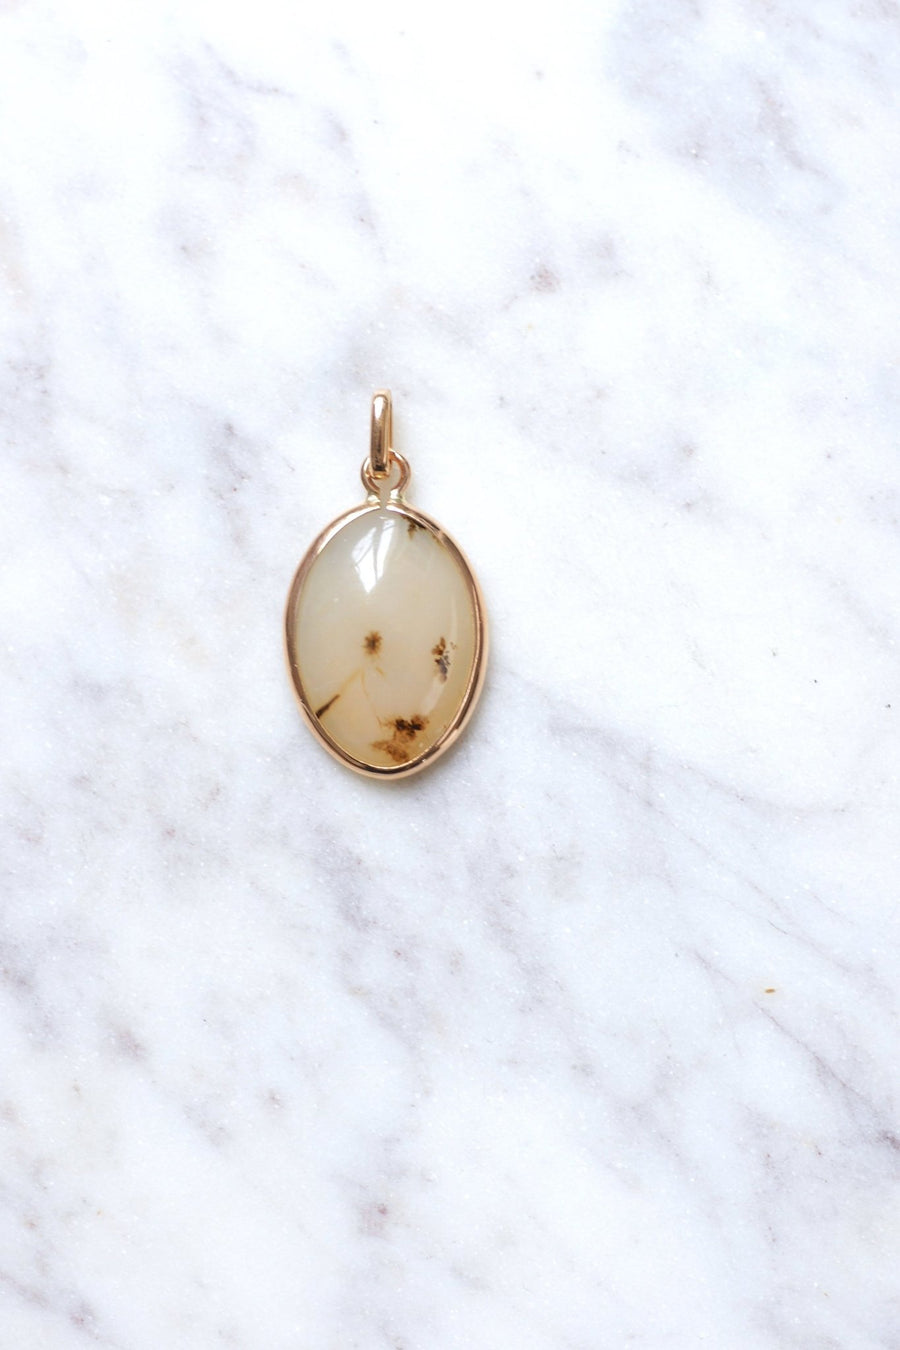 Vintage rose gold and dendritic agate pendant - Penelope Gallery